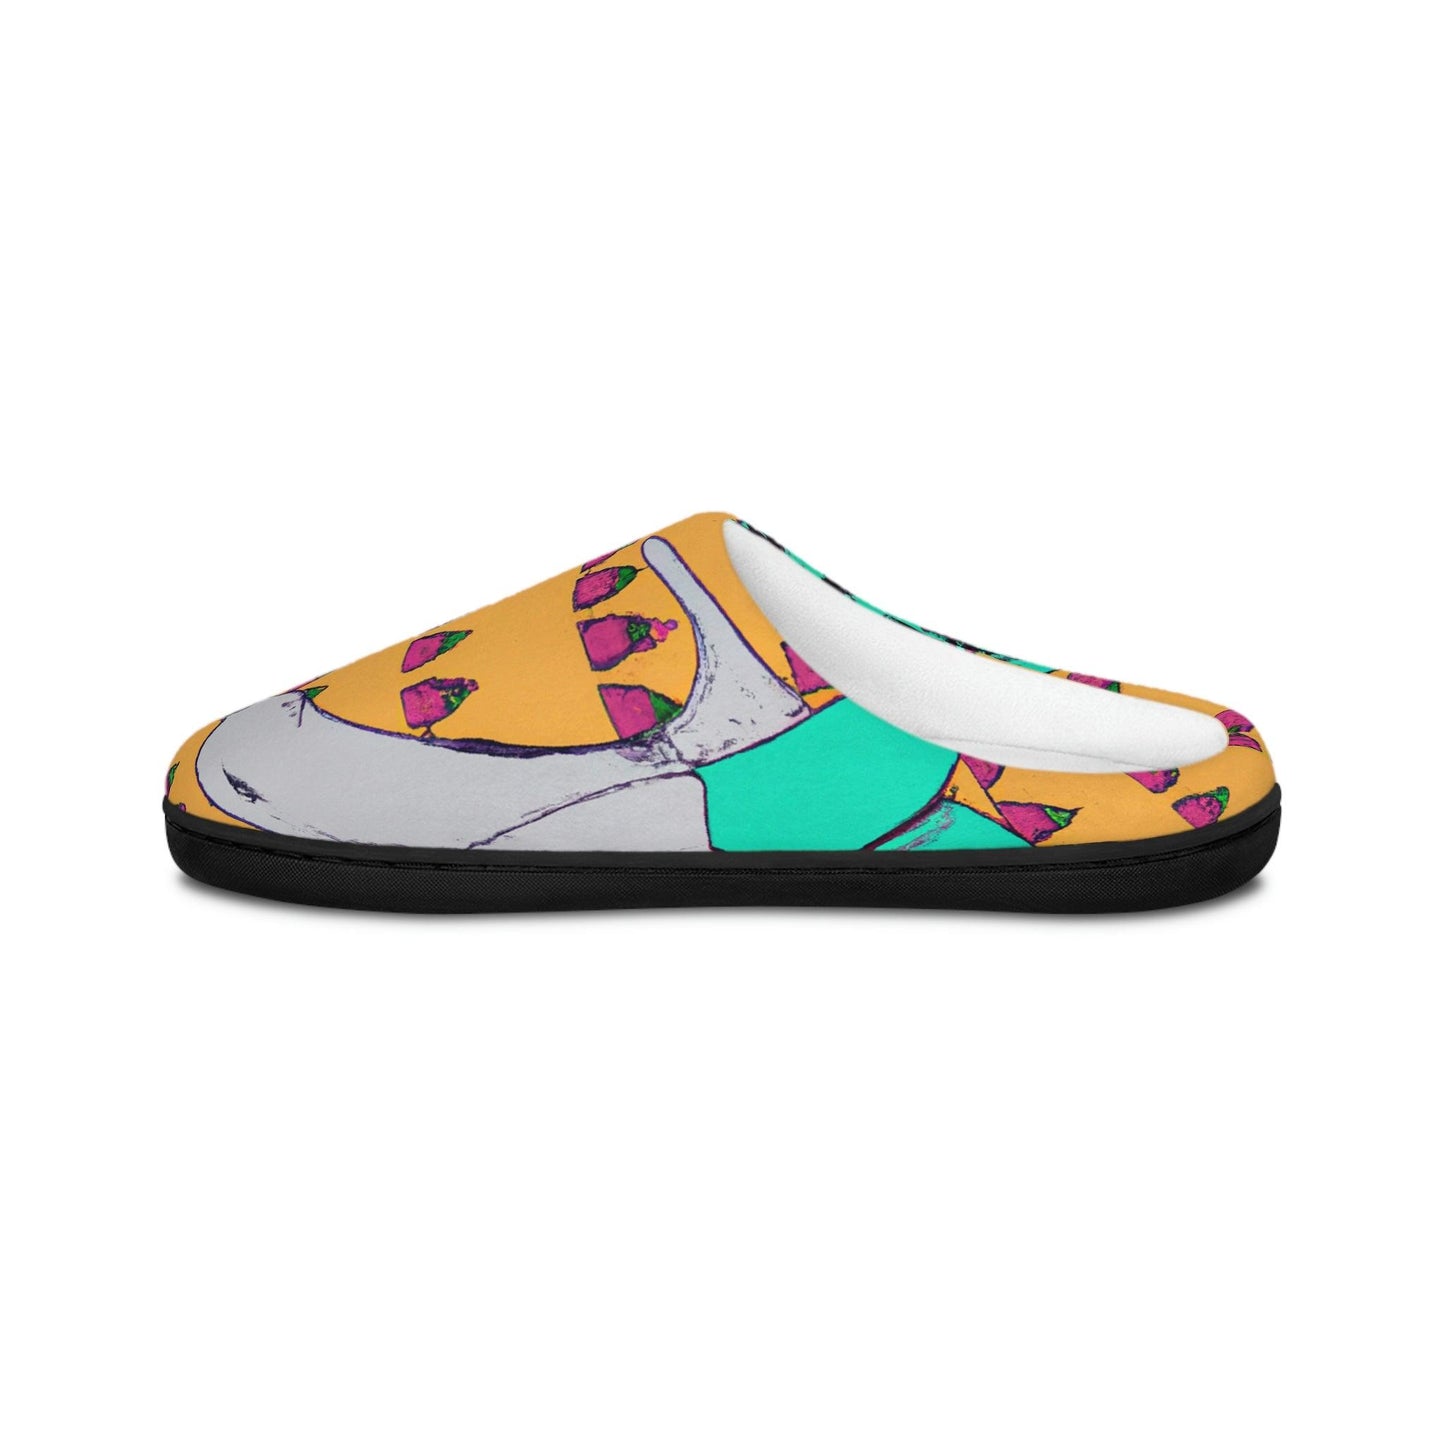 Omelette or Smoothie Women's Indoor Slippers - MAIA HOMES